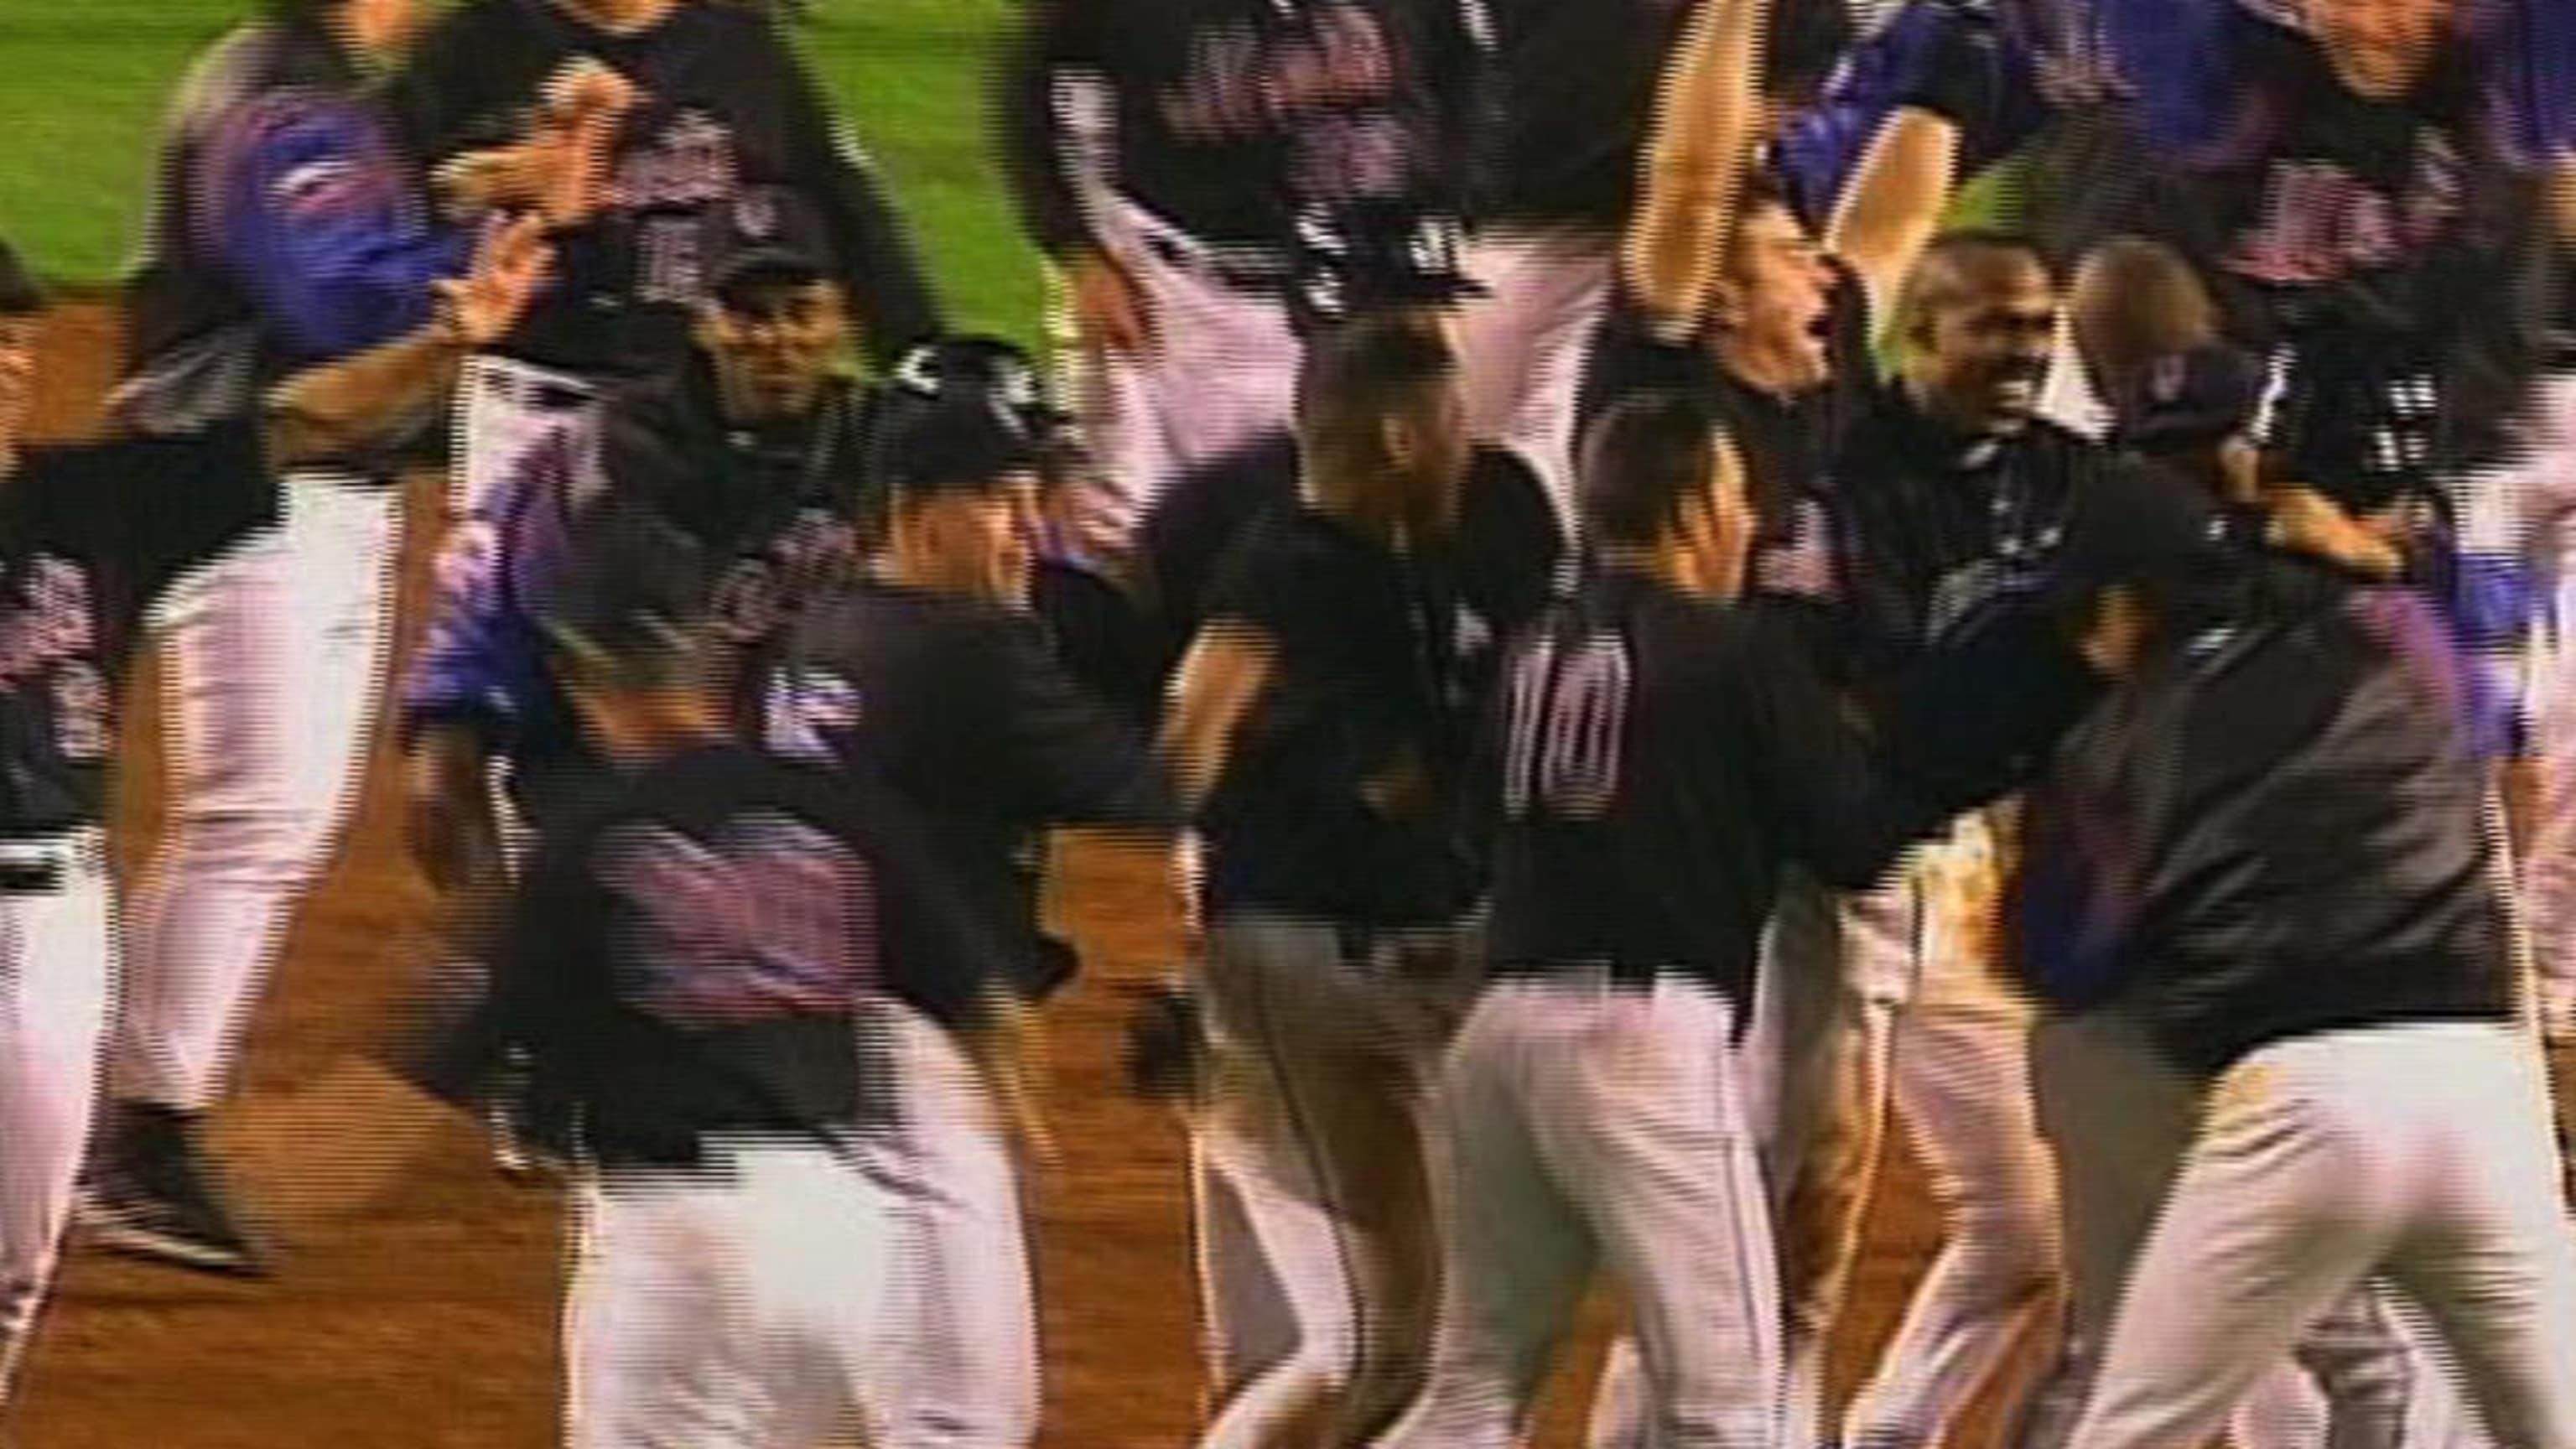 FOX Sports: MLB on X: This was the largest #WorldSeries comeback